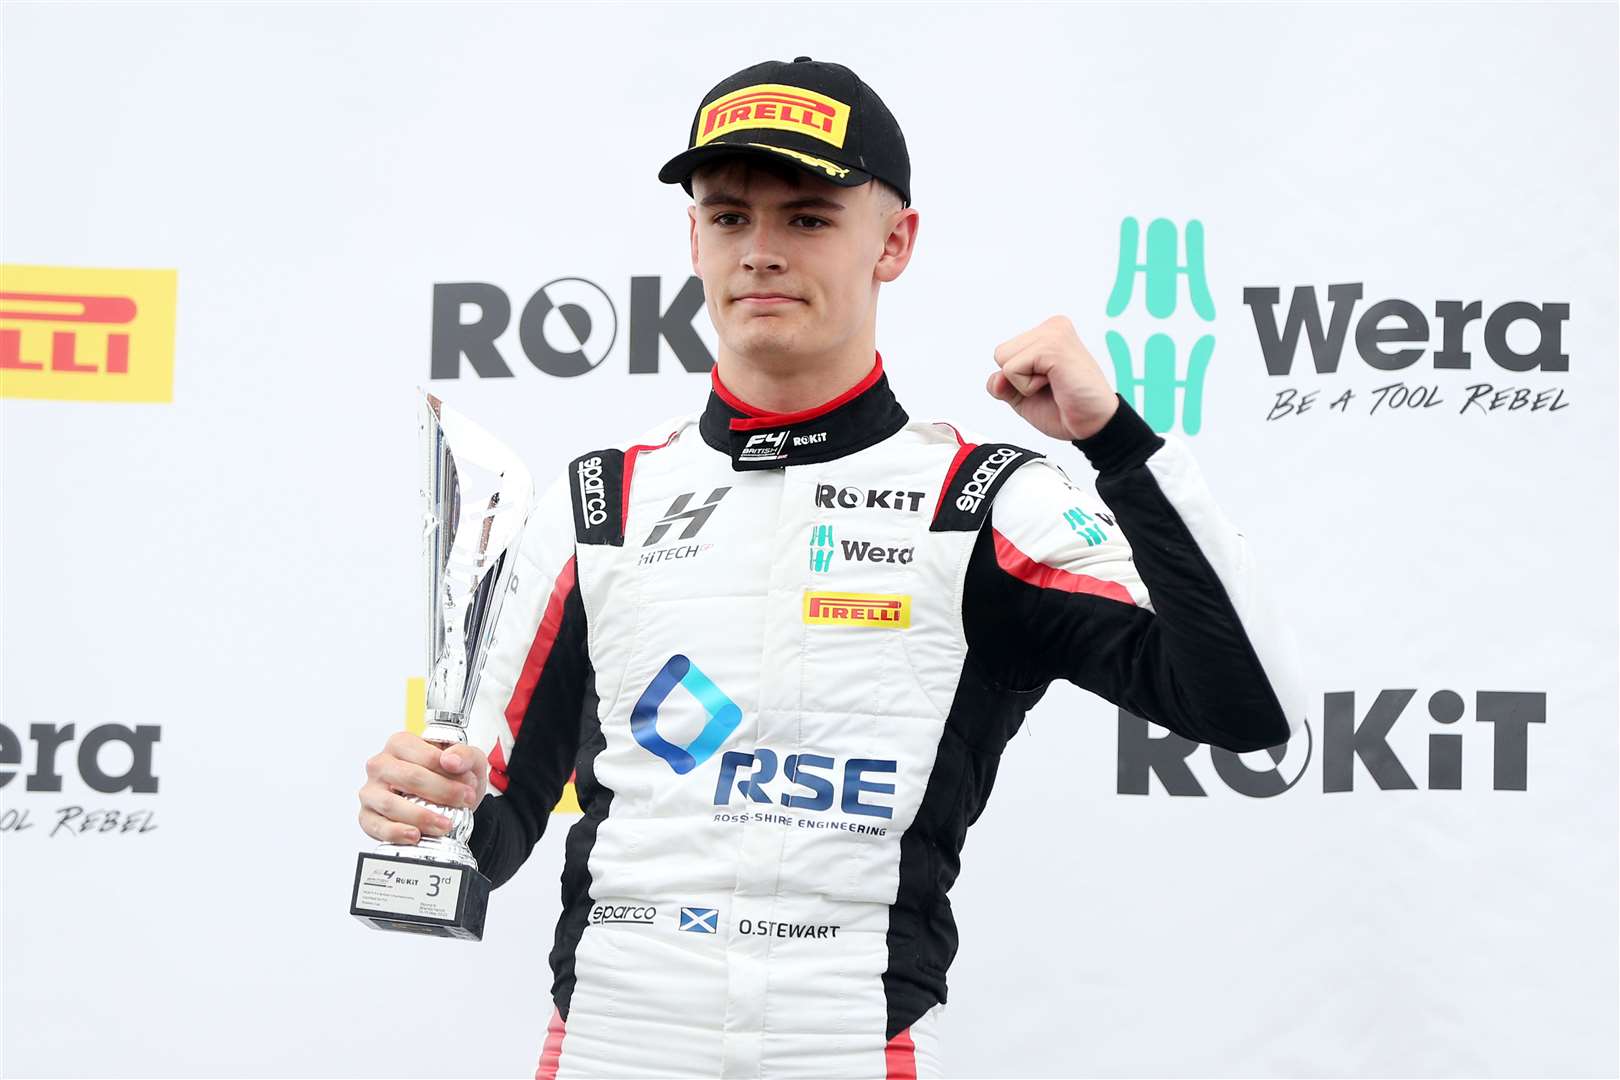 Ollie Stewart earned three tookie podium finishes in mixed conditions at Brands Hatch.